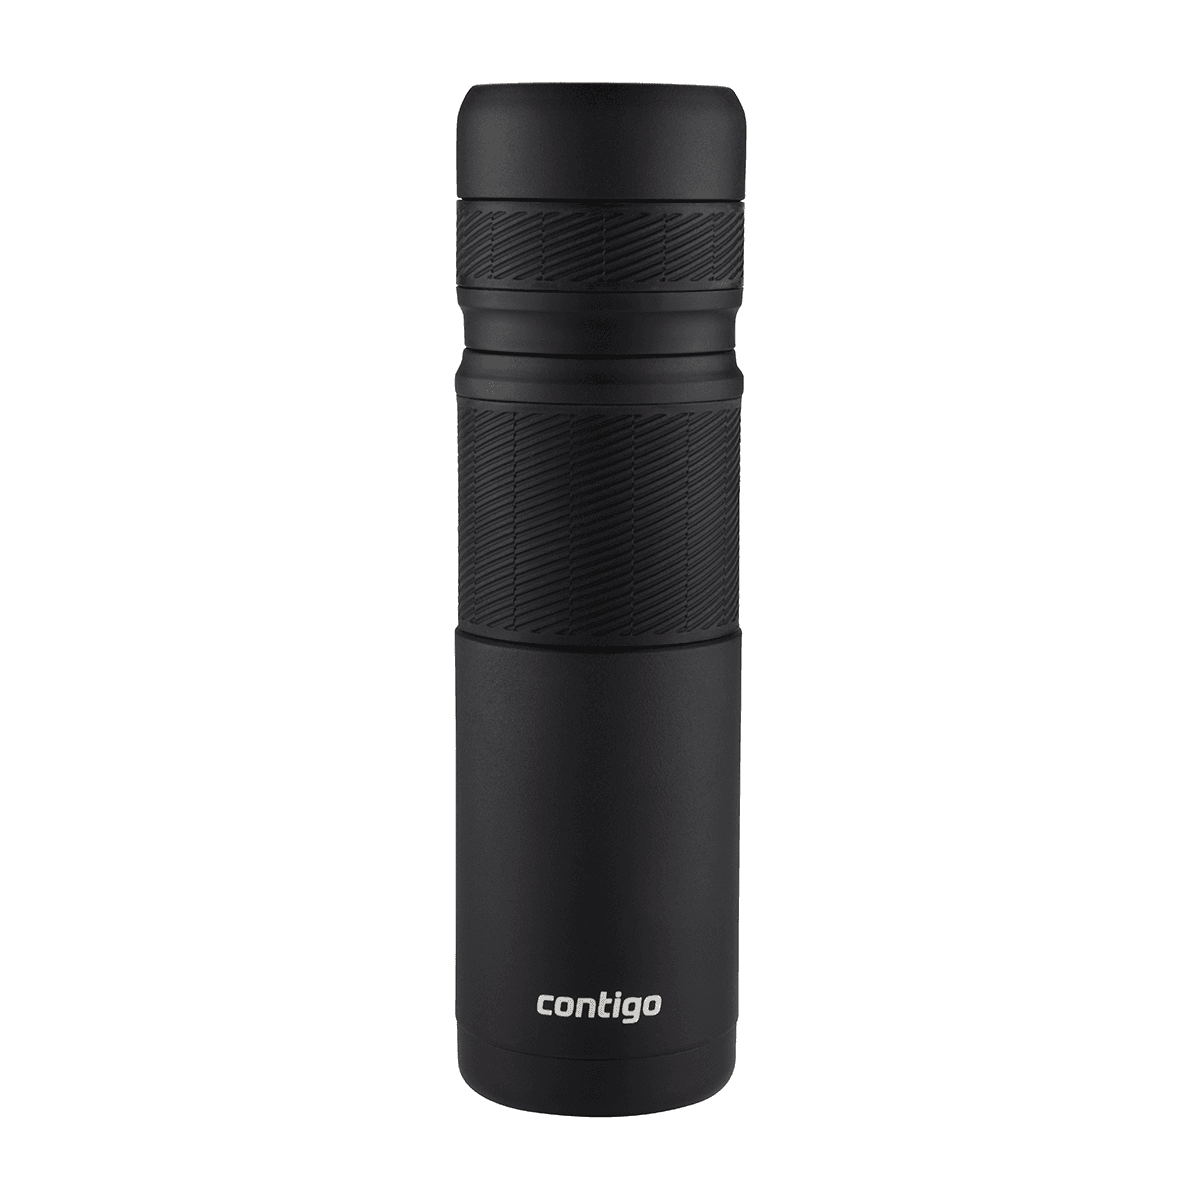 Contigo Black Vacuum Insulated Stainless Steel Thermal Bottle with 360 Interface 740 ml